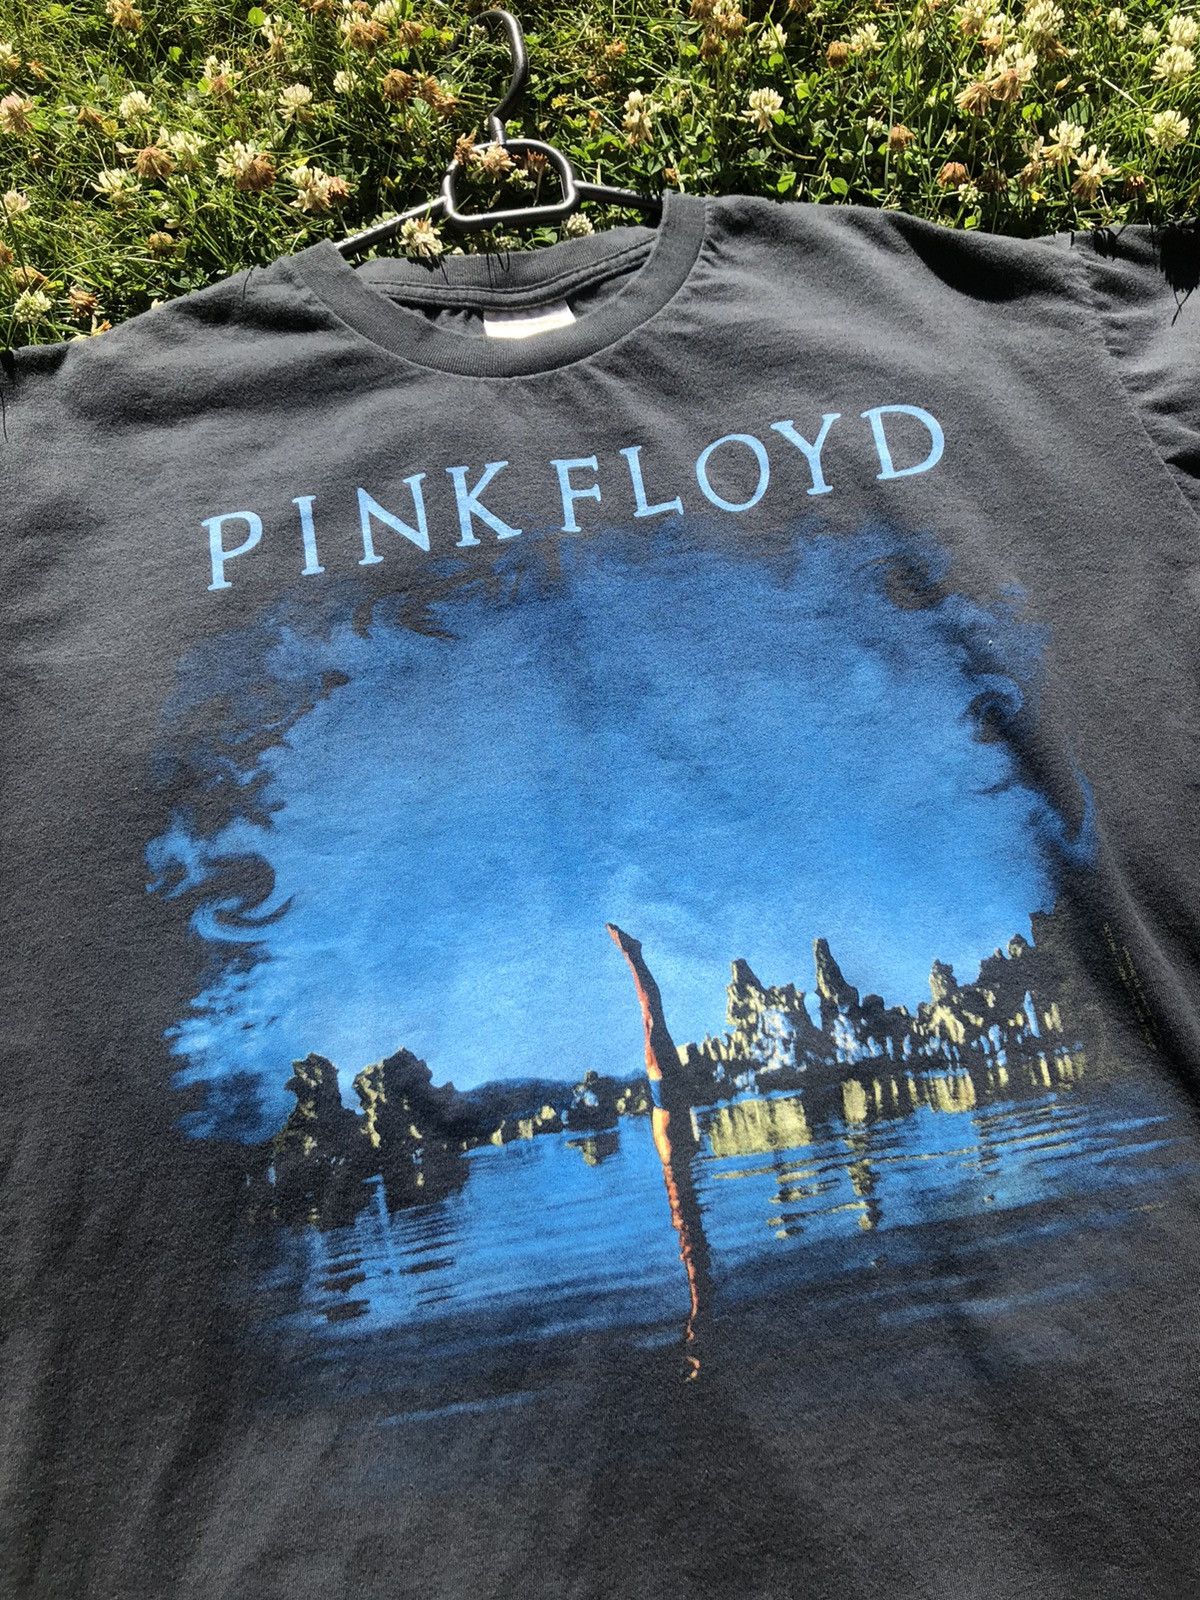 Pink Floyd Vintage 1992 Pink “Floyd Wish You Were Here” Tee Size US M / EU 48-50 / 2 - 2 Preview